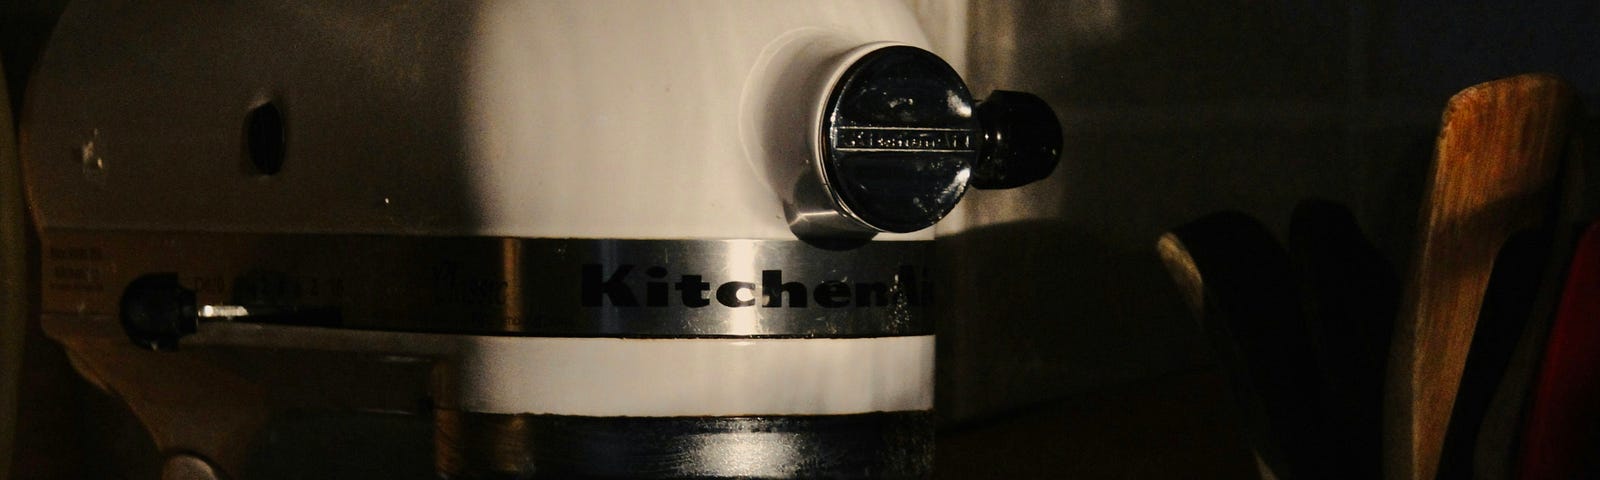 picture of a KitchenAid mixer.